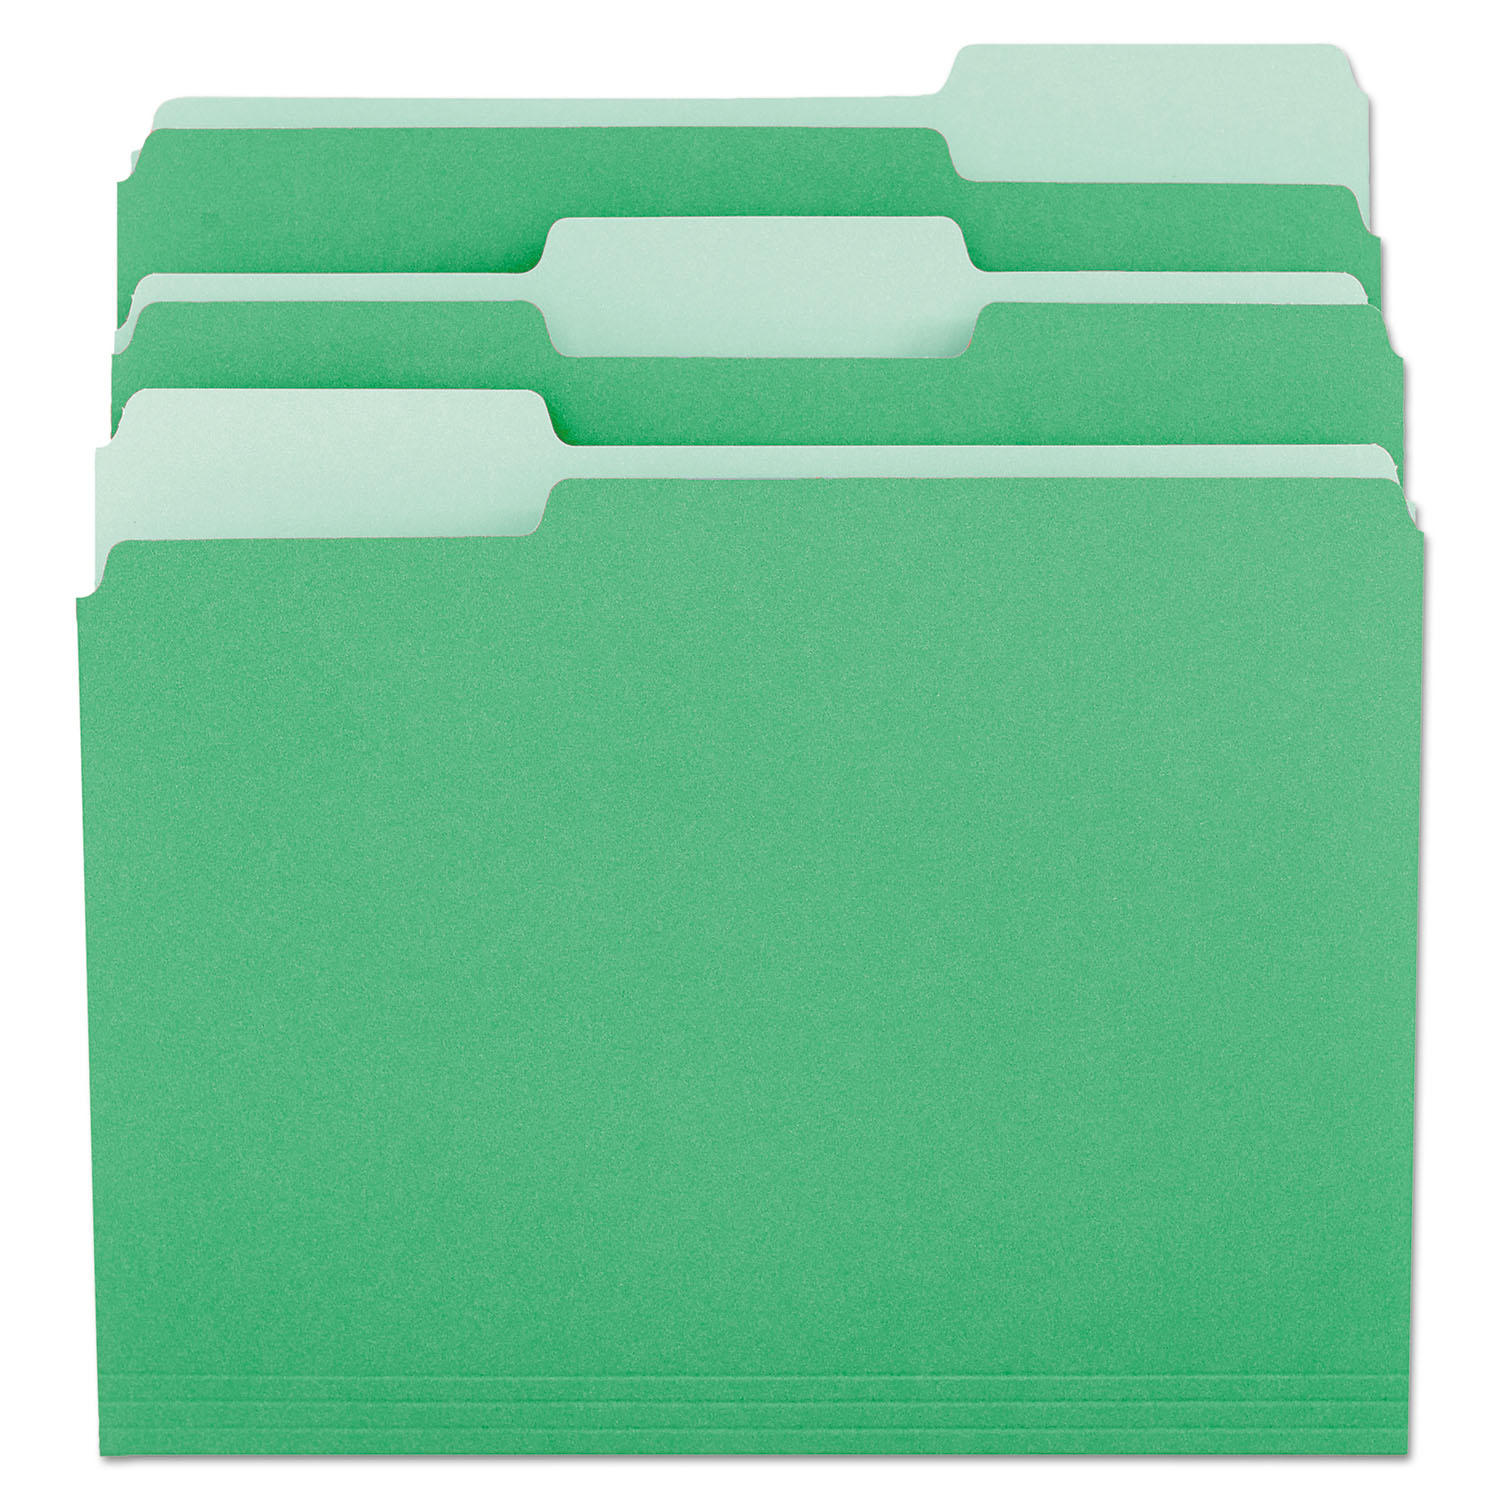 UPC 087547105023 product image for Universal File Folders, 1/3 Cut One-Ply Tab, Letter, Green/Light Green, 100/Box | upcitemdb.com